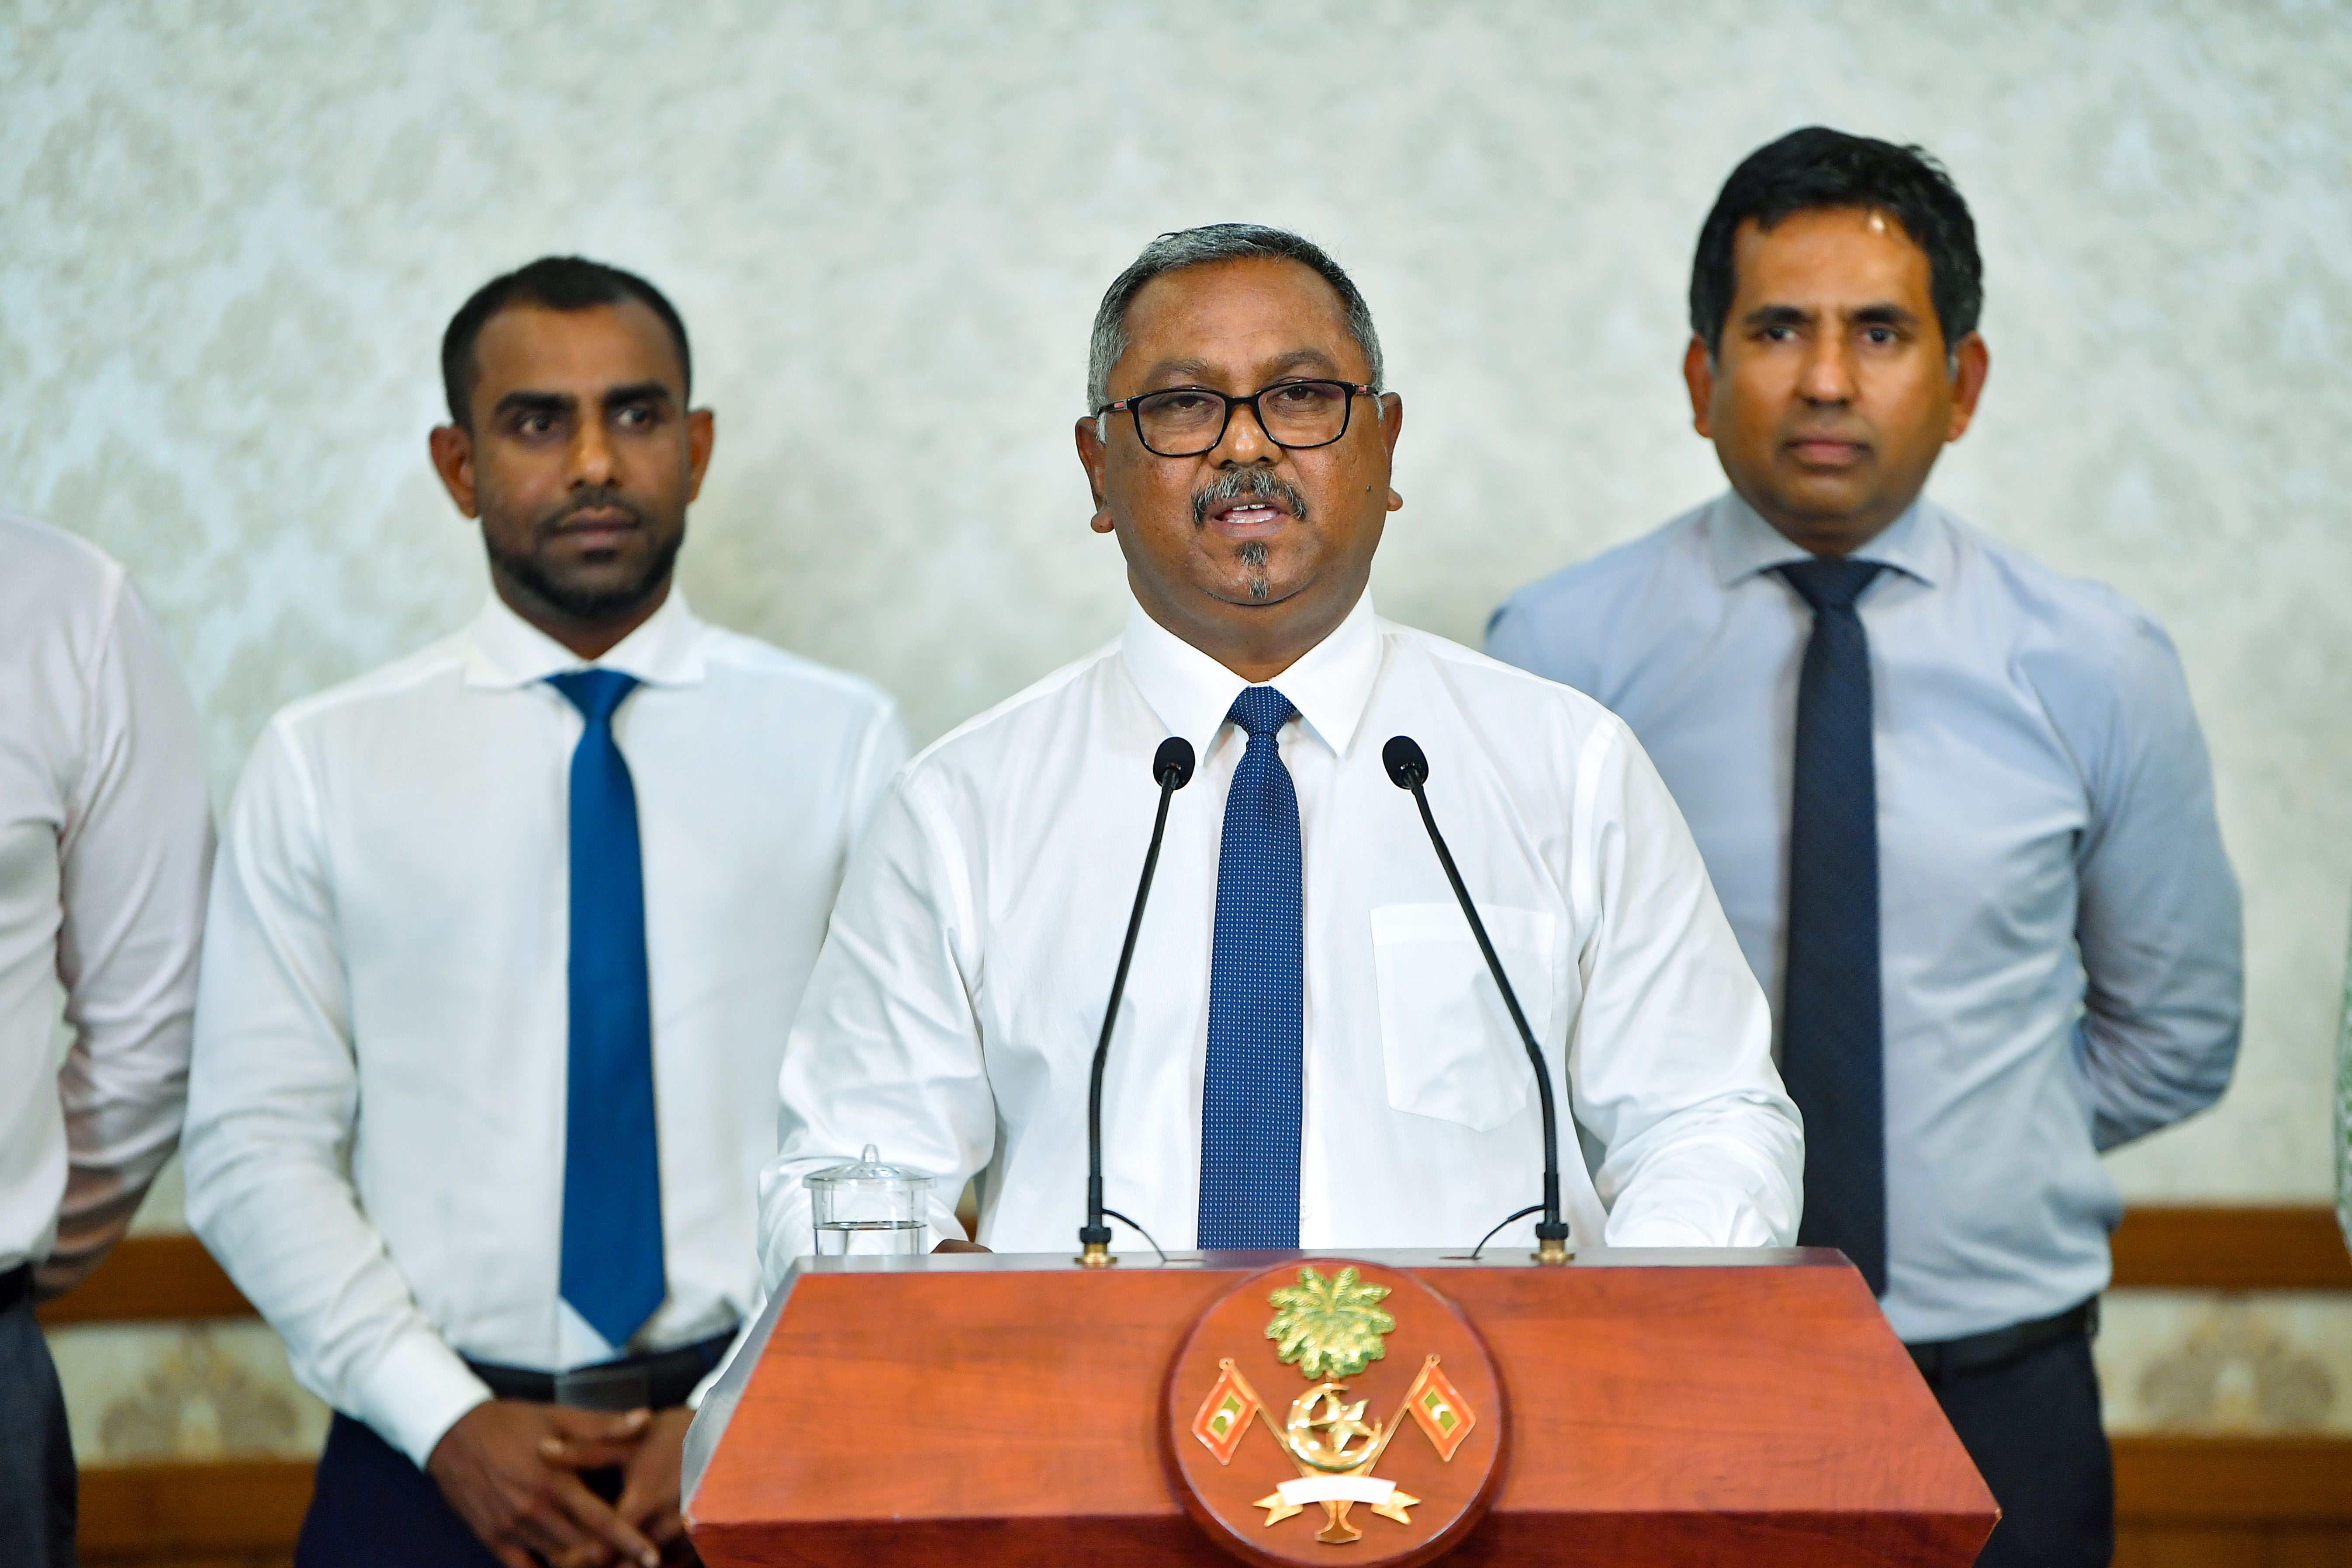 Minister for Strategic Communications in the President's Office Ibrahim Khaleel during a Press Conference earlier this year.